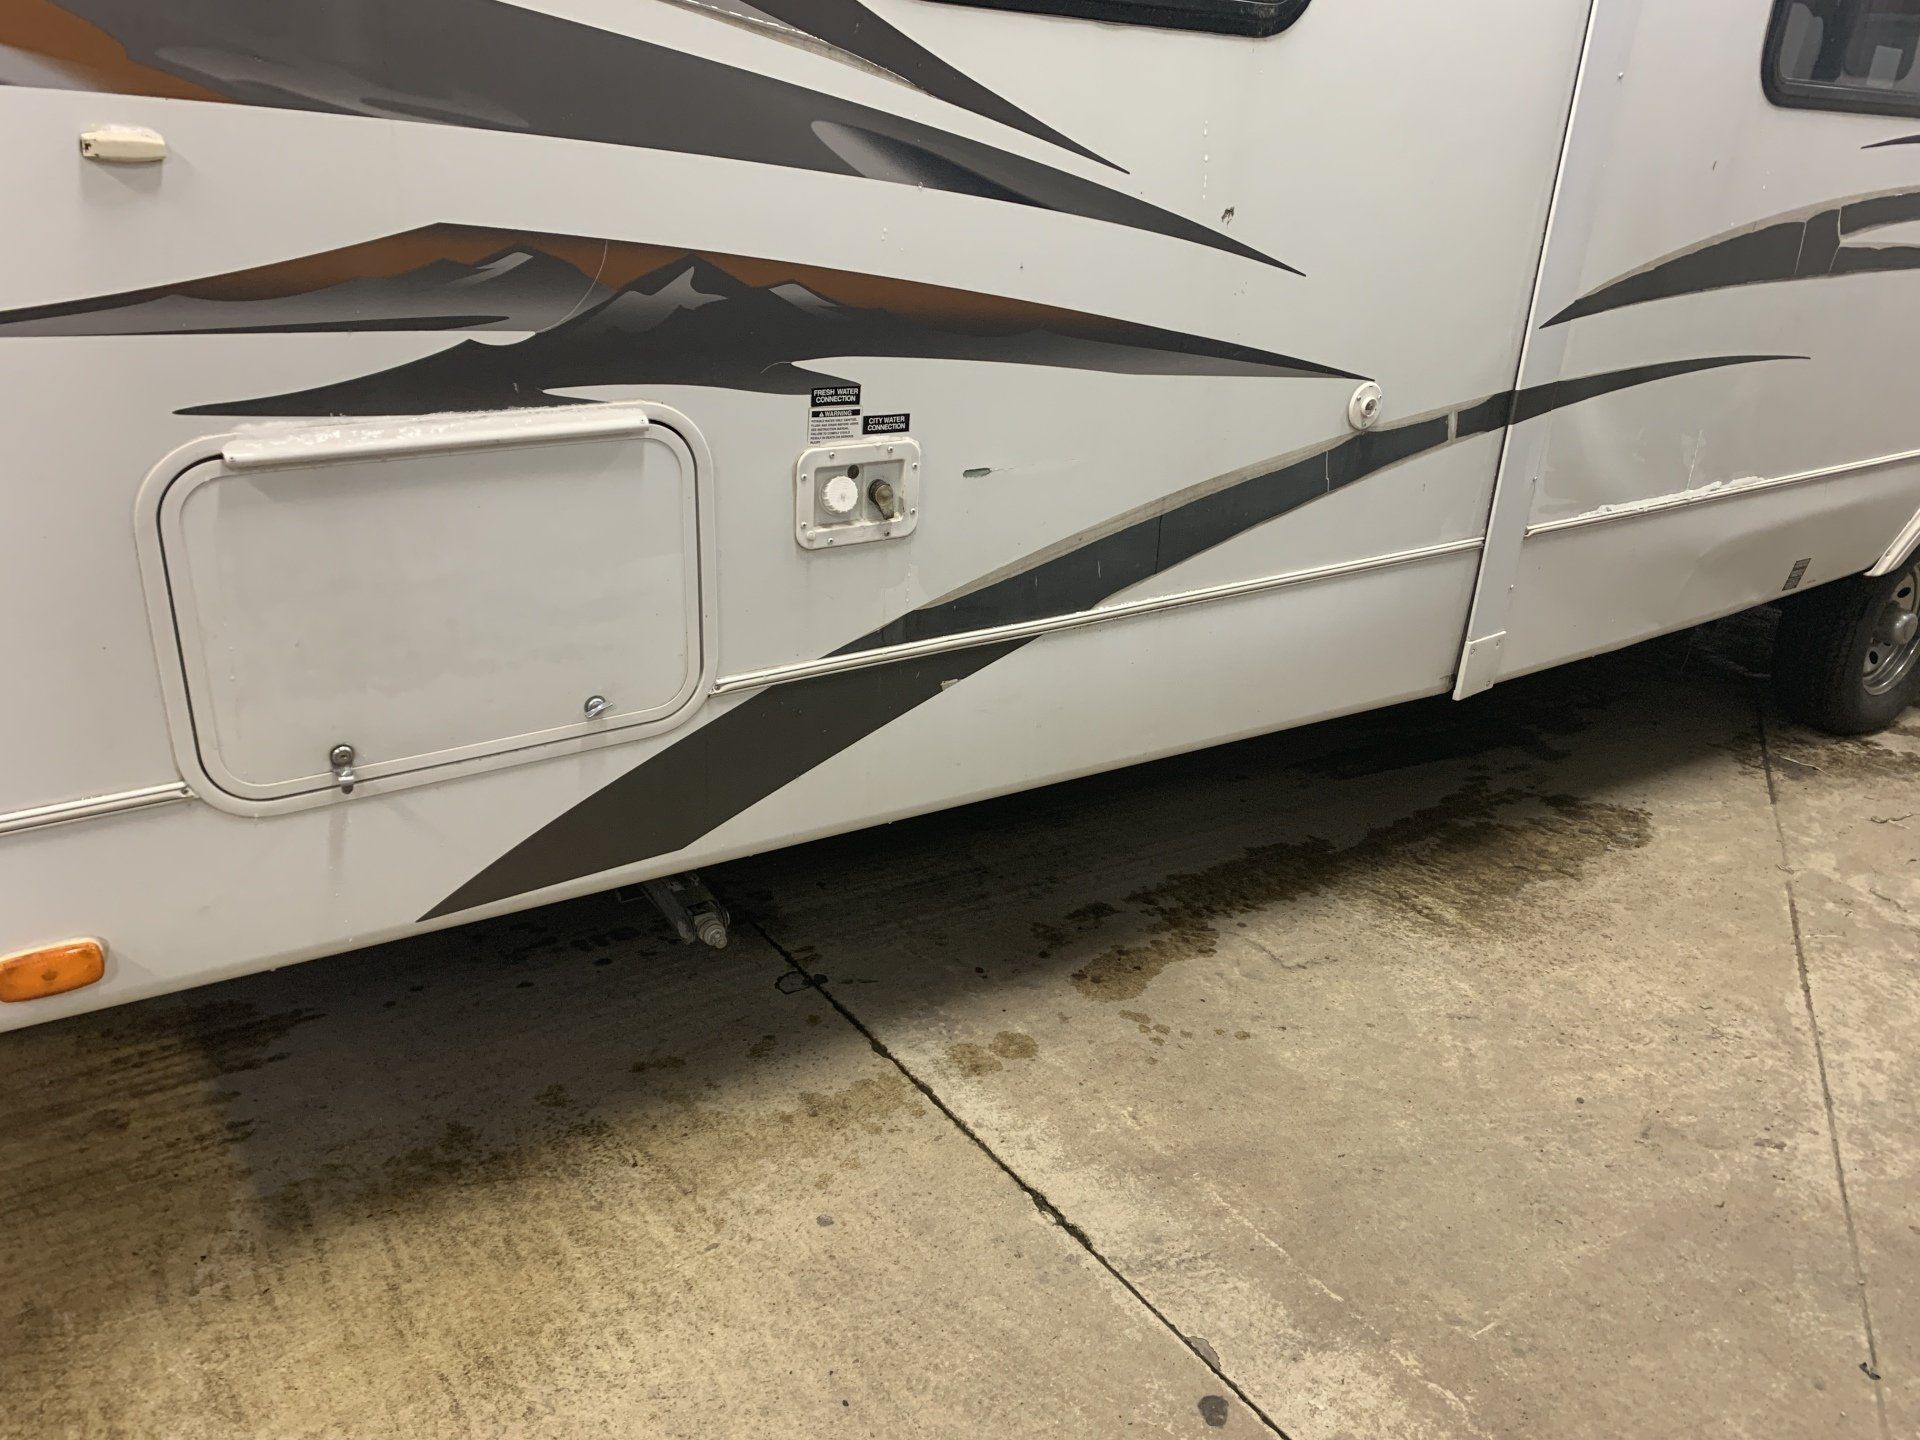 2020 - Alberta's Worst RV Decal Contest - Grand Prize Winner - Before & After - Pic 20